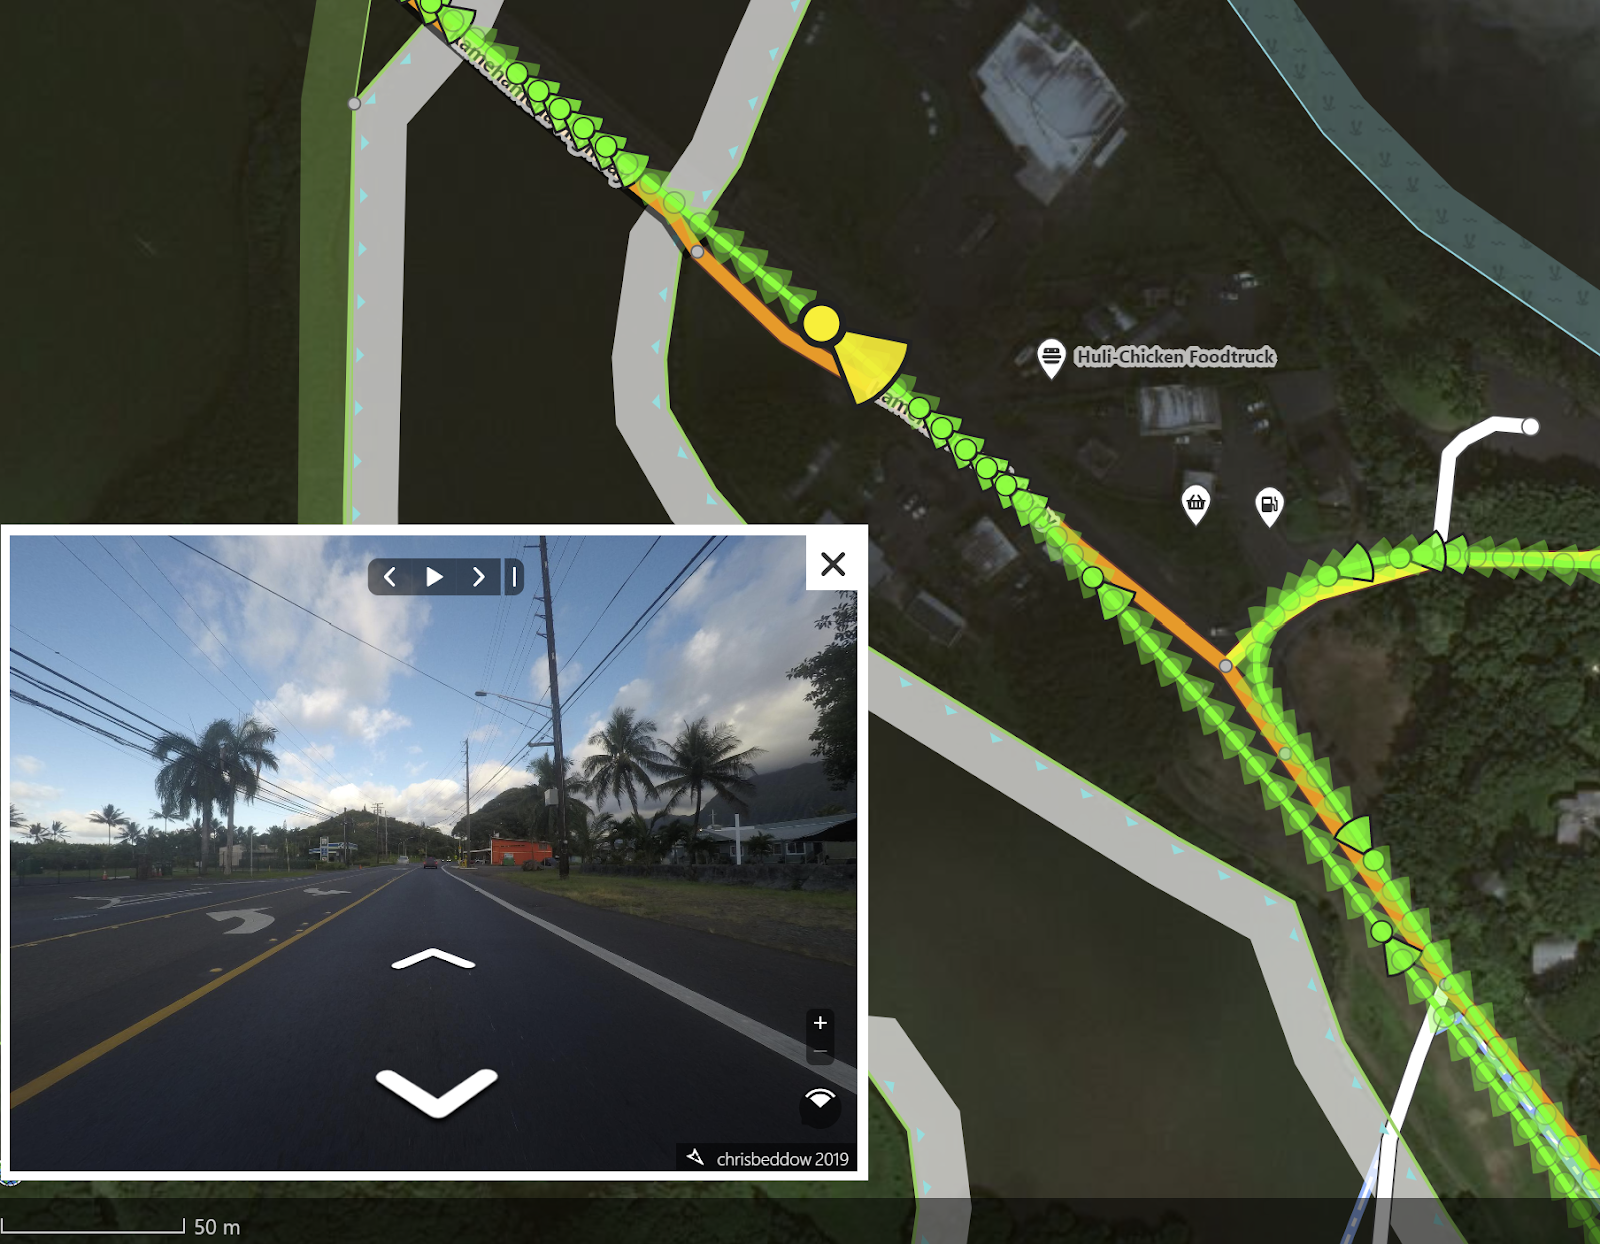 Image viewer loads in iD Editor from Mapillary.